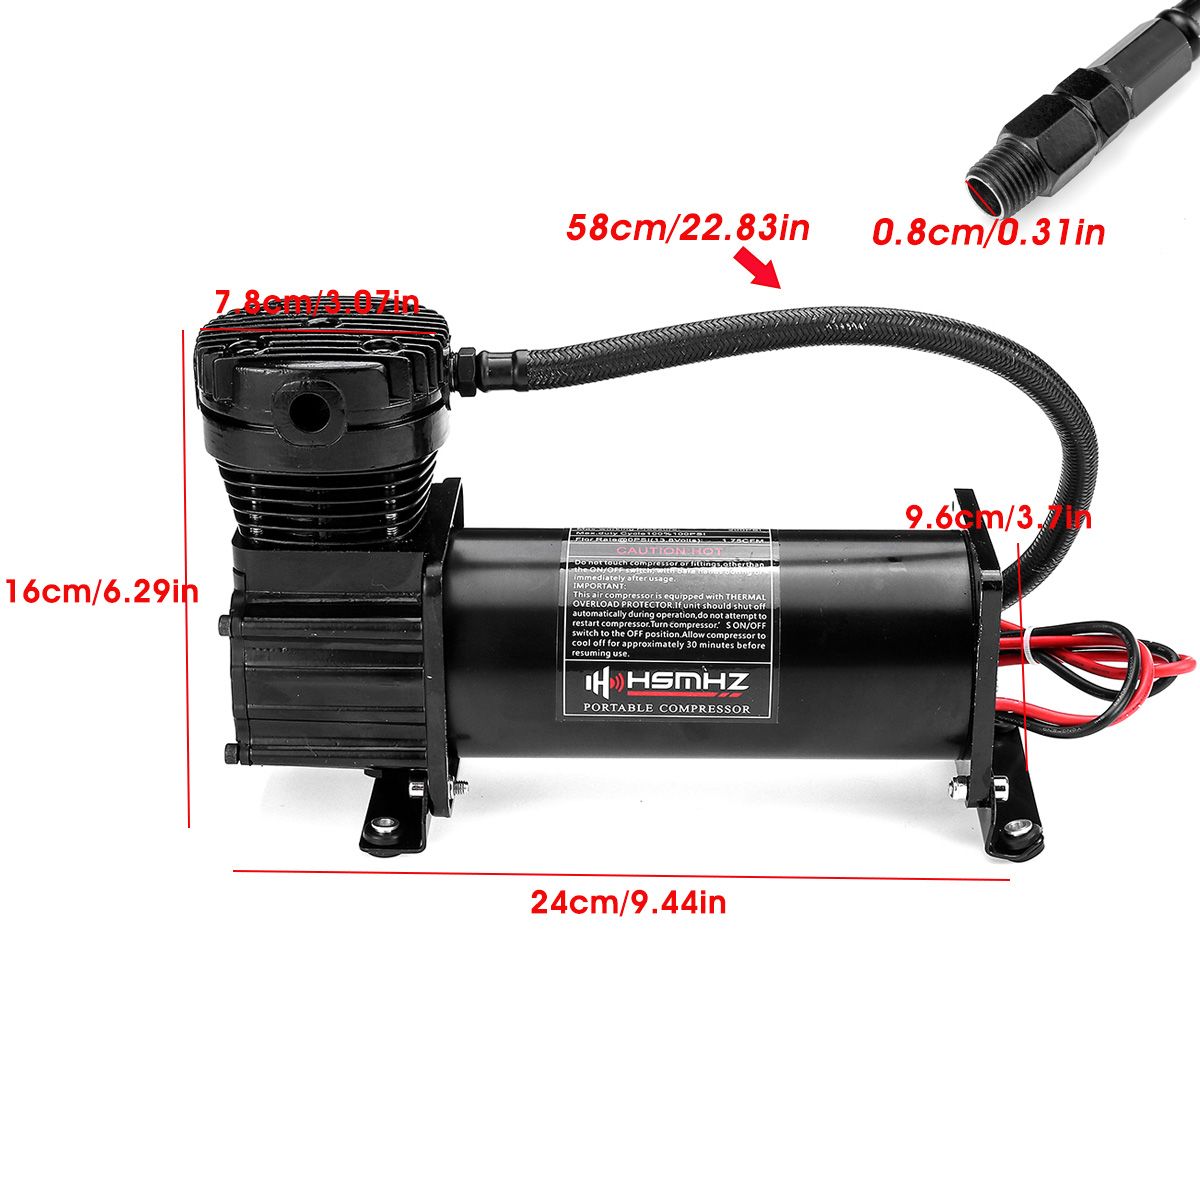 10-GAL-12V-200-PSI-444C-Max-Horn-Air-Compressor-With-Relays-Switch-For-Truck-Boat-1590509